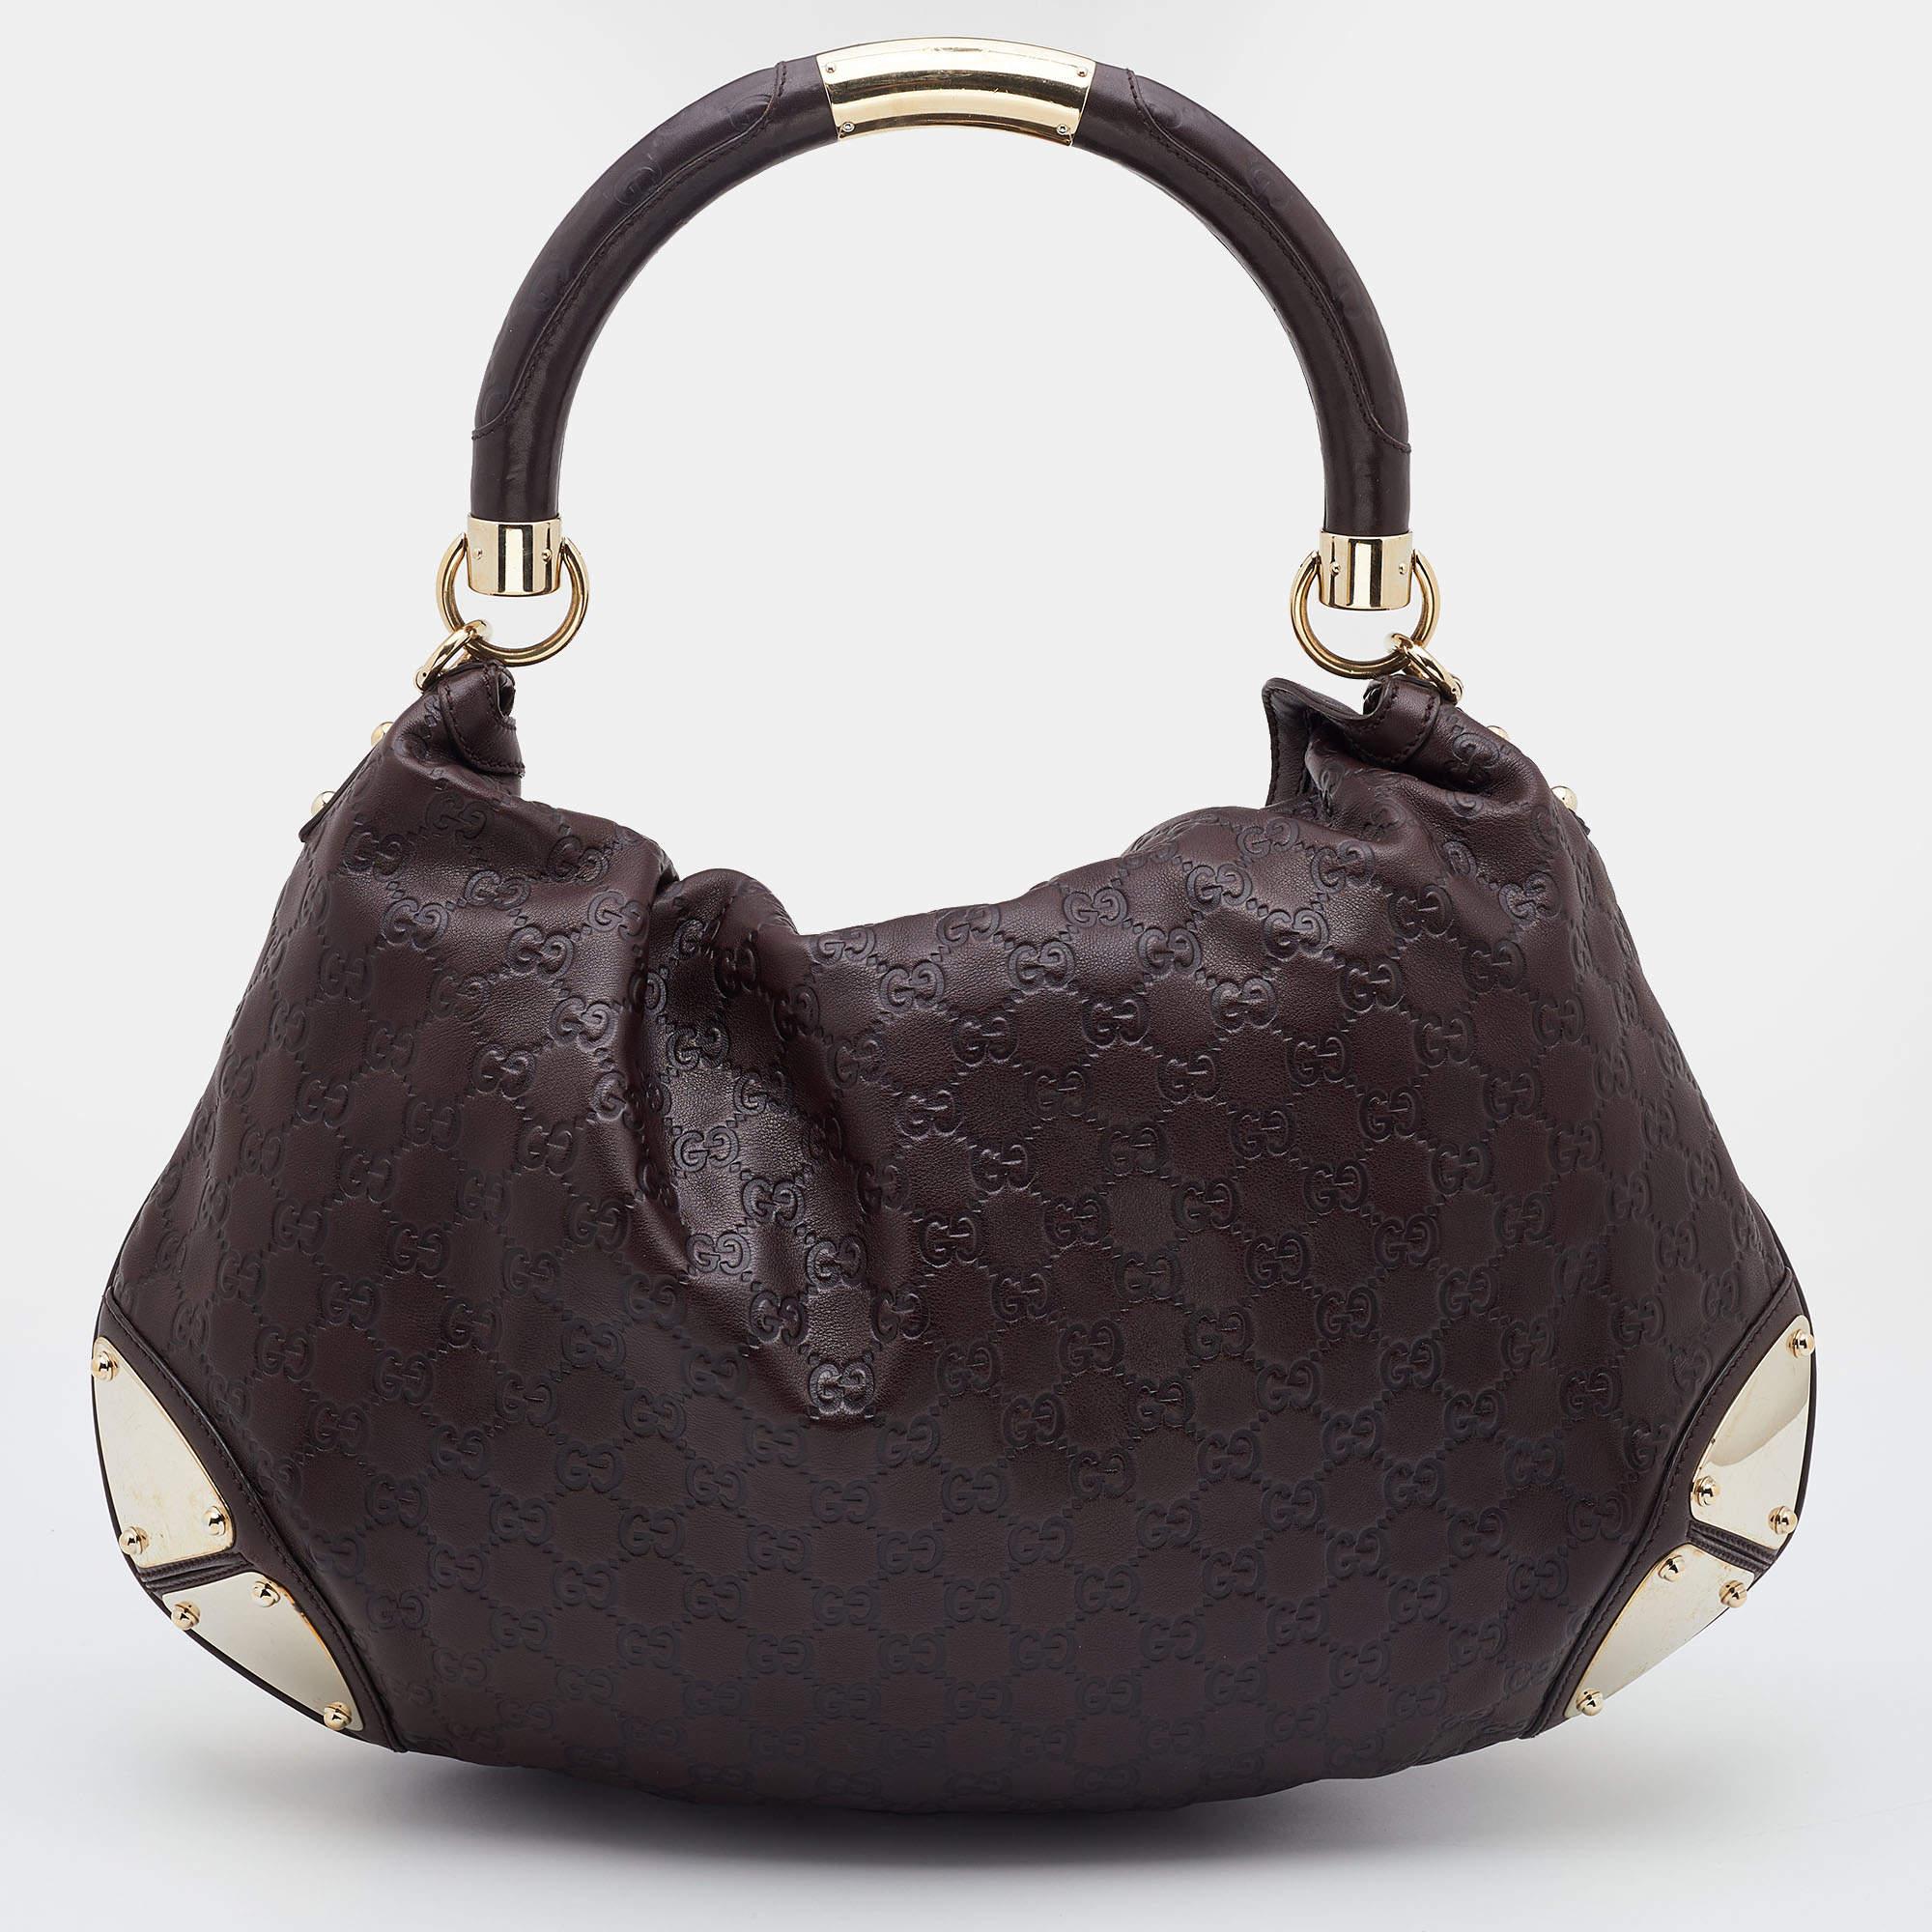 Crafted from Guccissima leather, this Gucci hobo has a top with two bamboo-detailed tassels and a spacious fabric interior. It also features a sturdy top handle, armored corners, and gold-tone hardware.

Includes: Original Dustbag, Detachable Strap